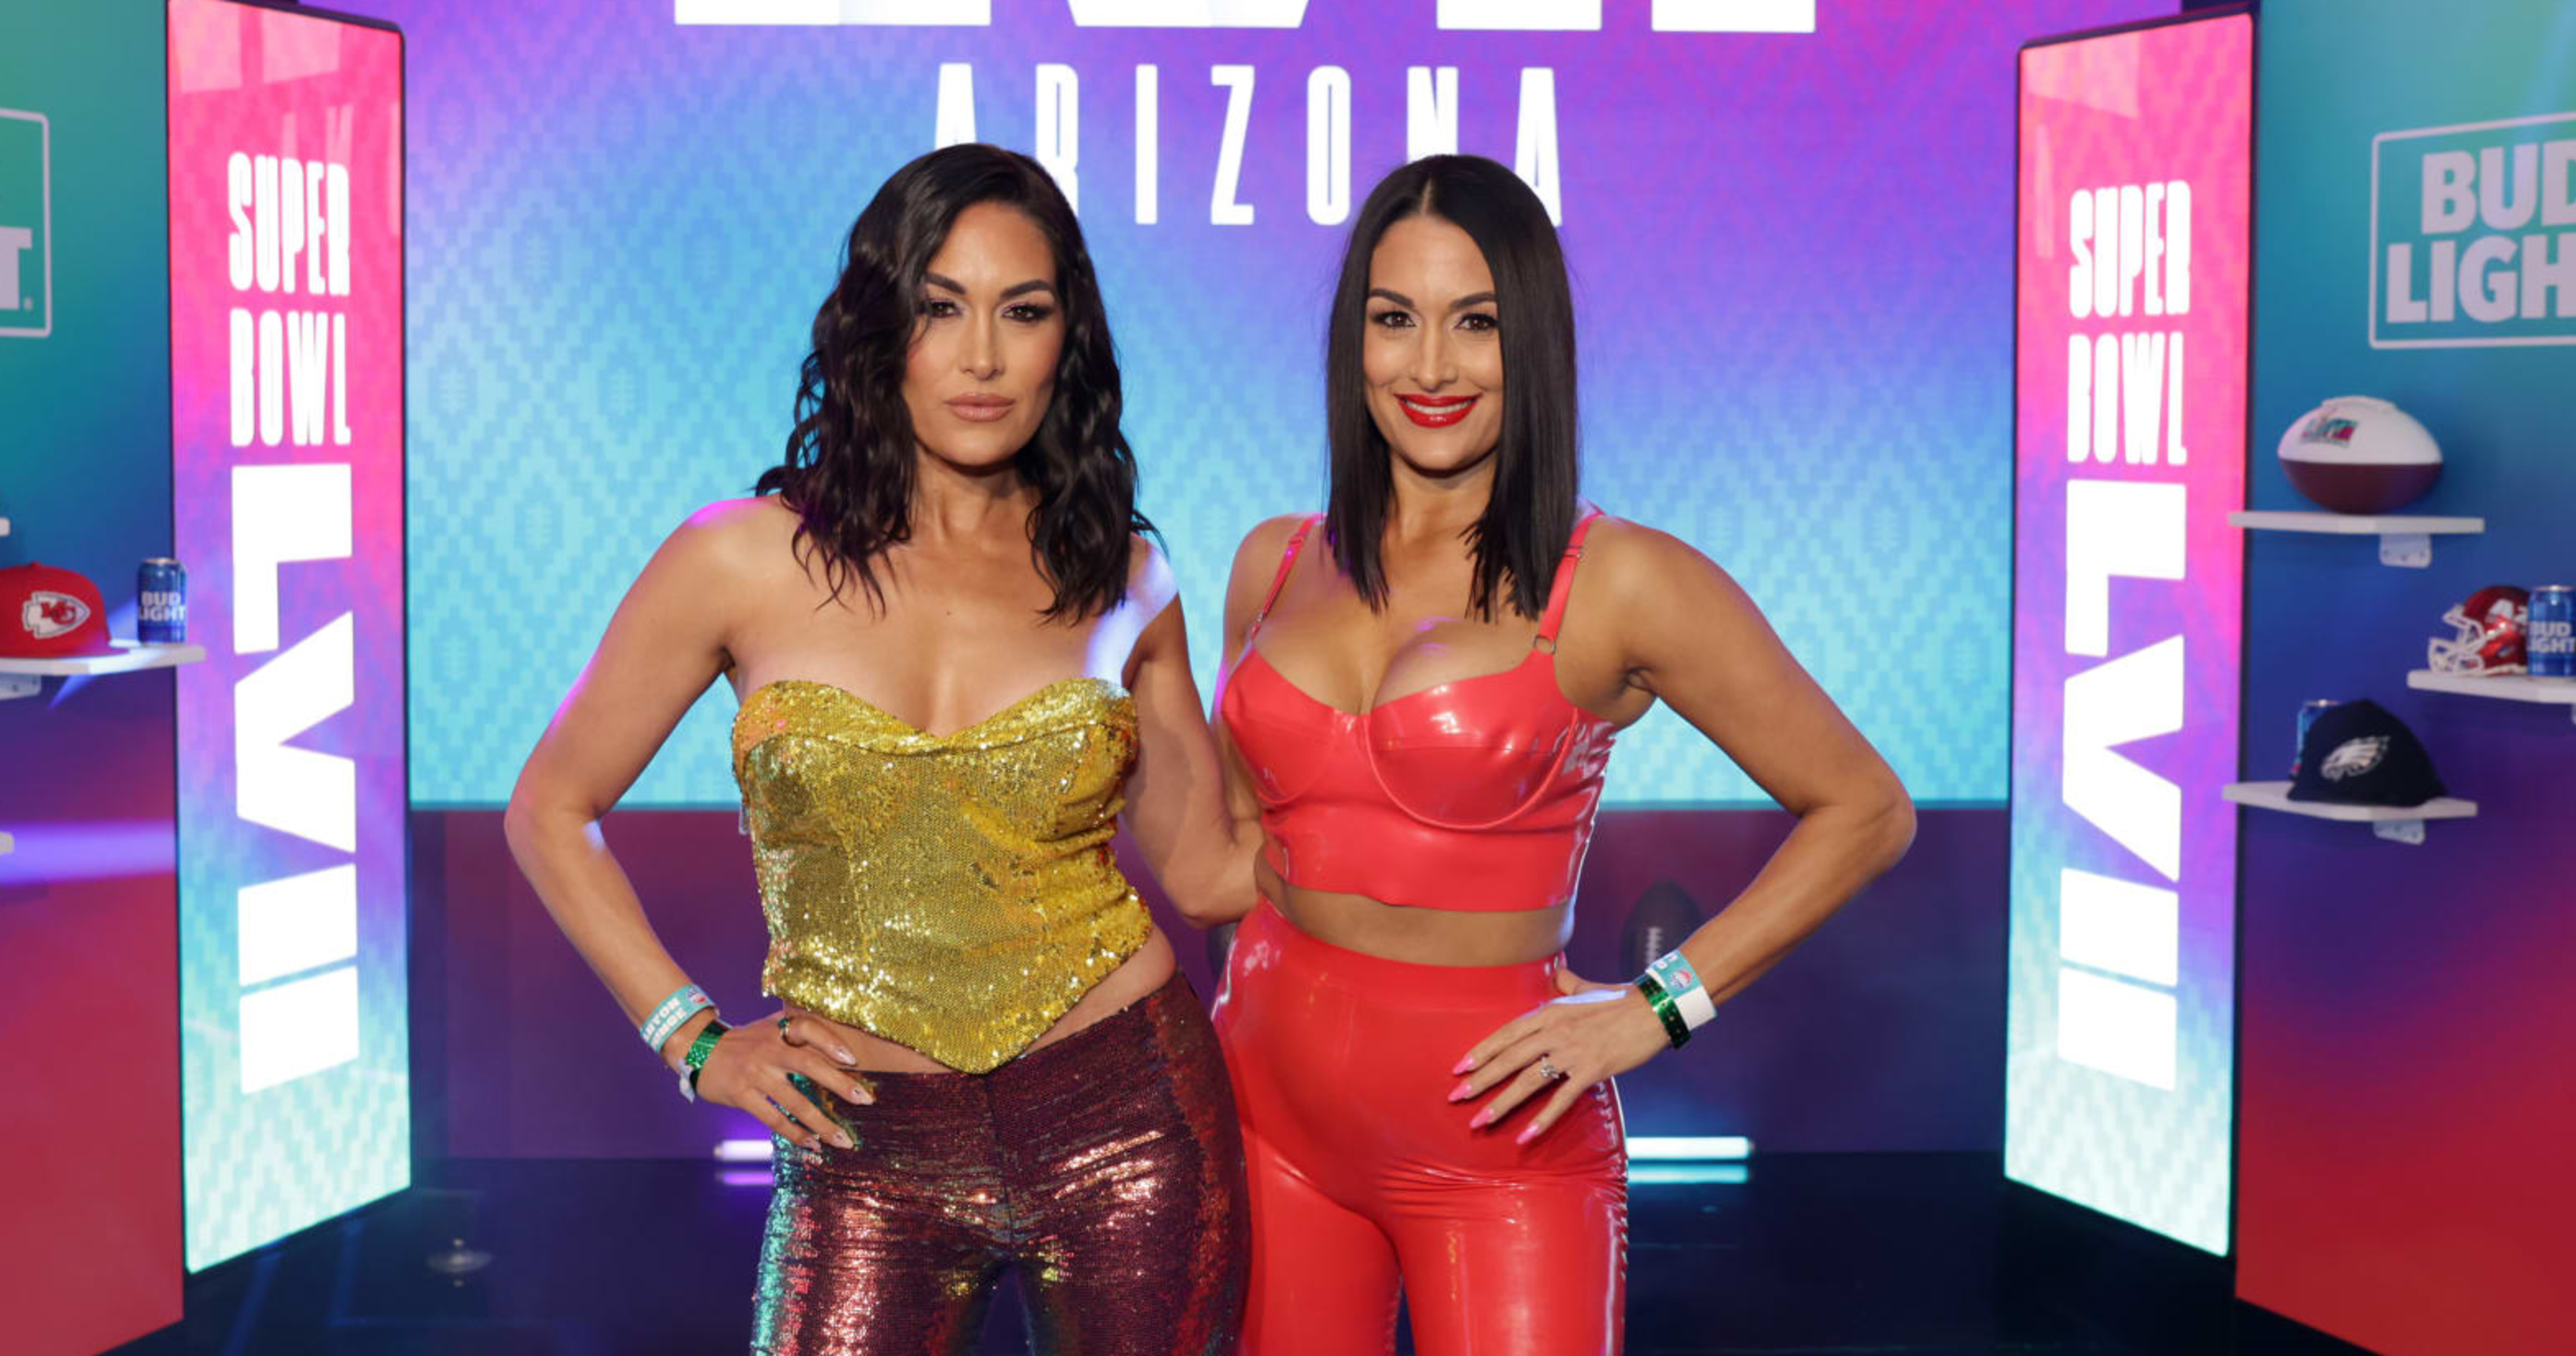 Brie Bella Xxx Video - Nikki, Brie Bella Announce WWE Departure, Will Go by The Garcia Twins |  News, Scores, Highlights, Stats, and Rumors | Bleacher Report